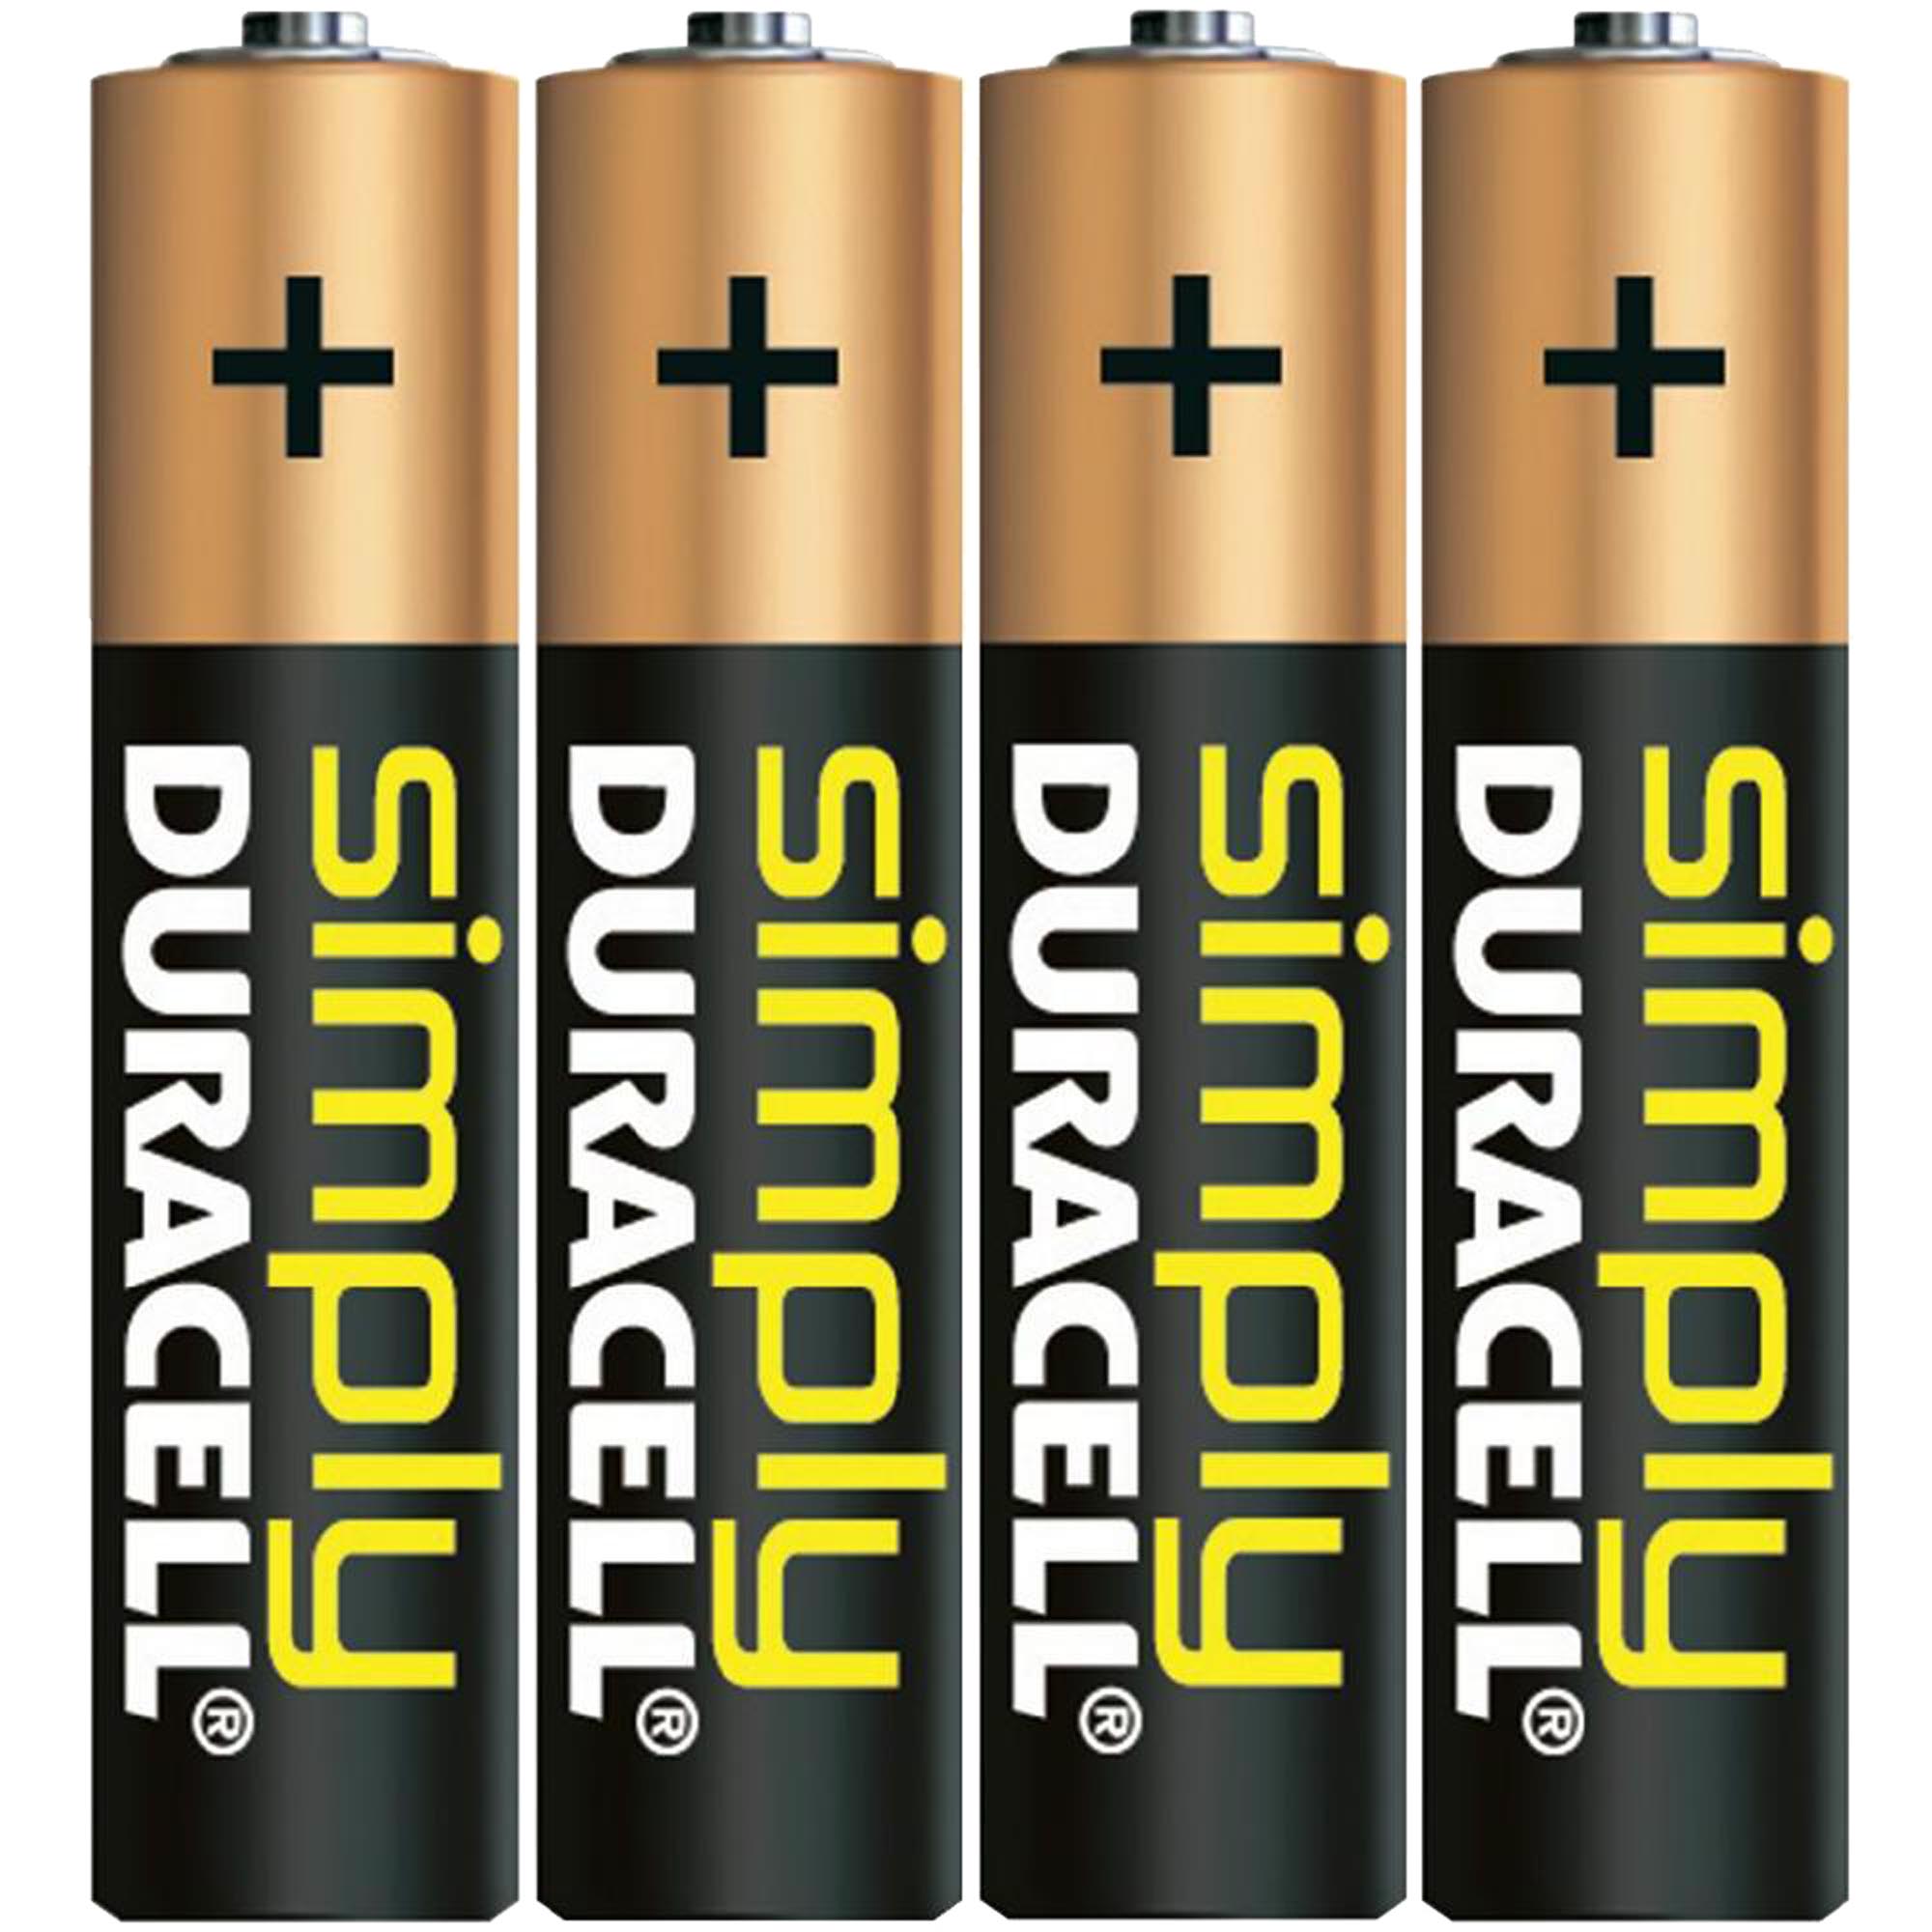 DURACELL - PILES ALCALINES